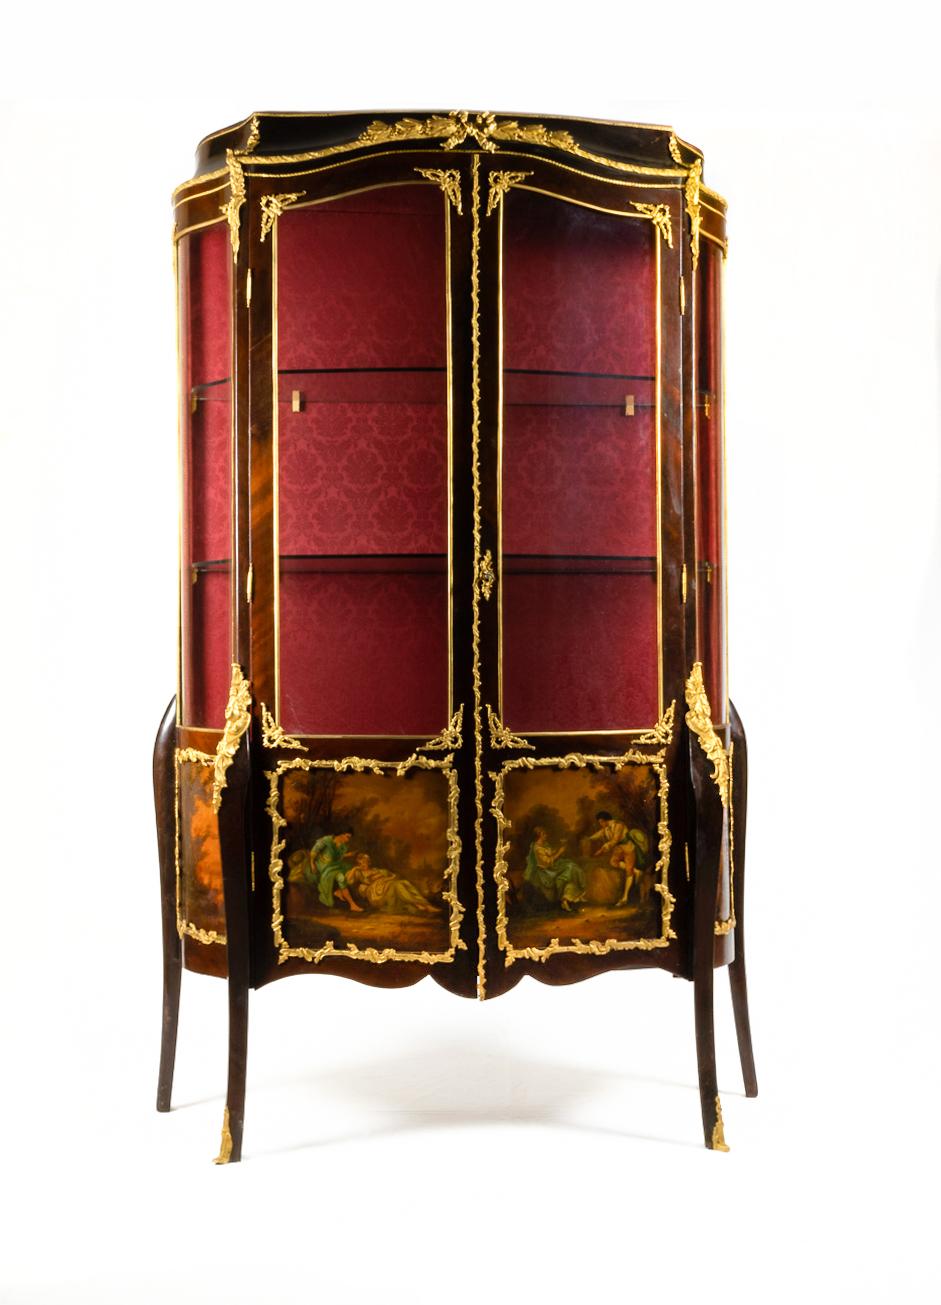 A stunning Vernis Martin vitrine cabinet, glazed paneled doors with painted gallant scenes and exquisite ormolu mounts. 

Four beautiful hand painted panels “H . Martin “ signed by the family descendants of the Martin brothers (in the court of Louis